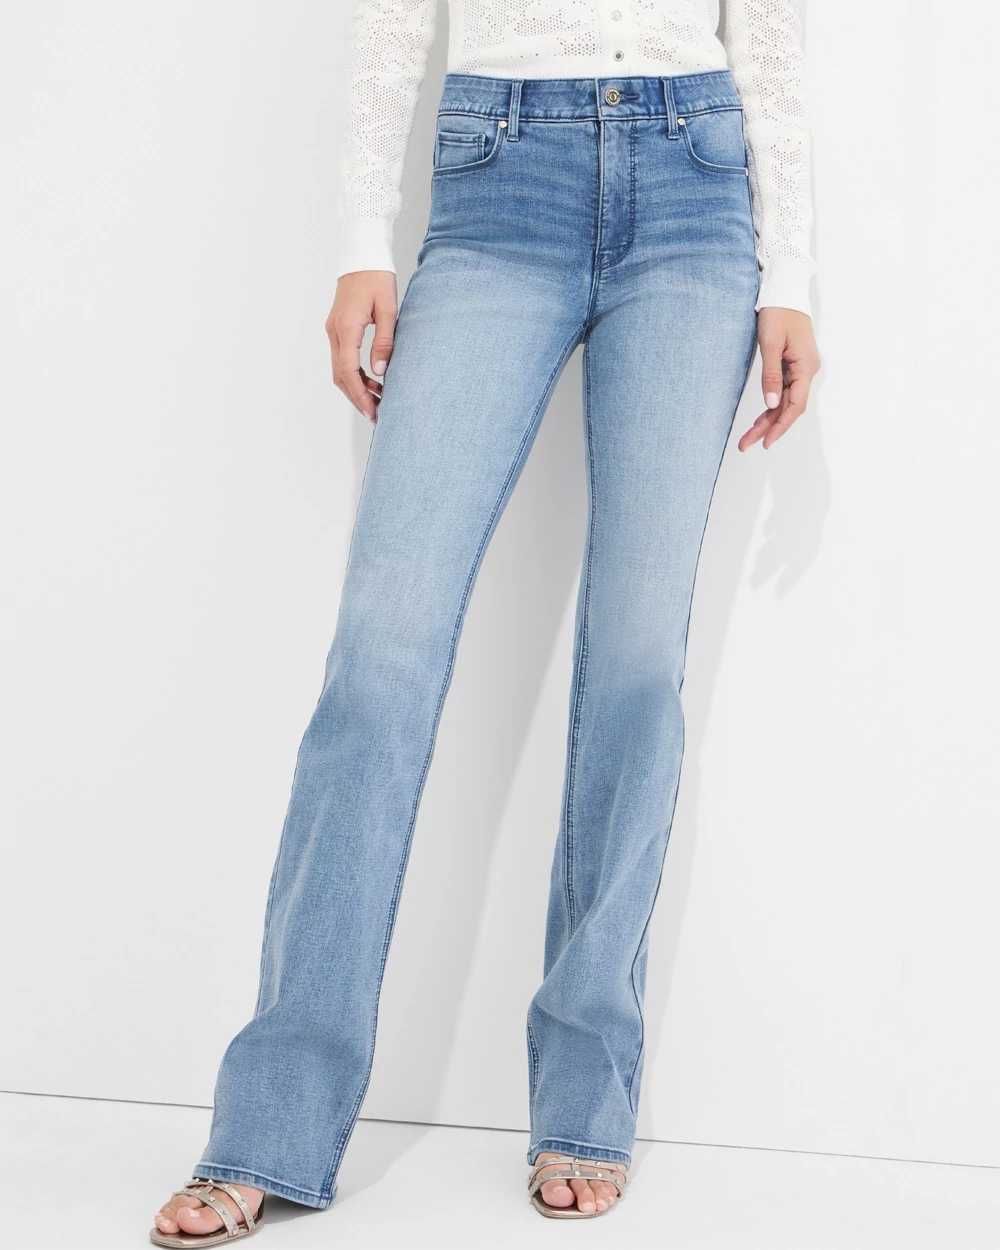 Outlet WHBM High-Rise Skinny Flare Jeans click to view larger image.